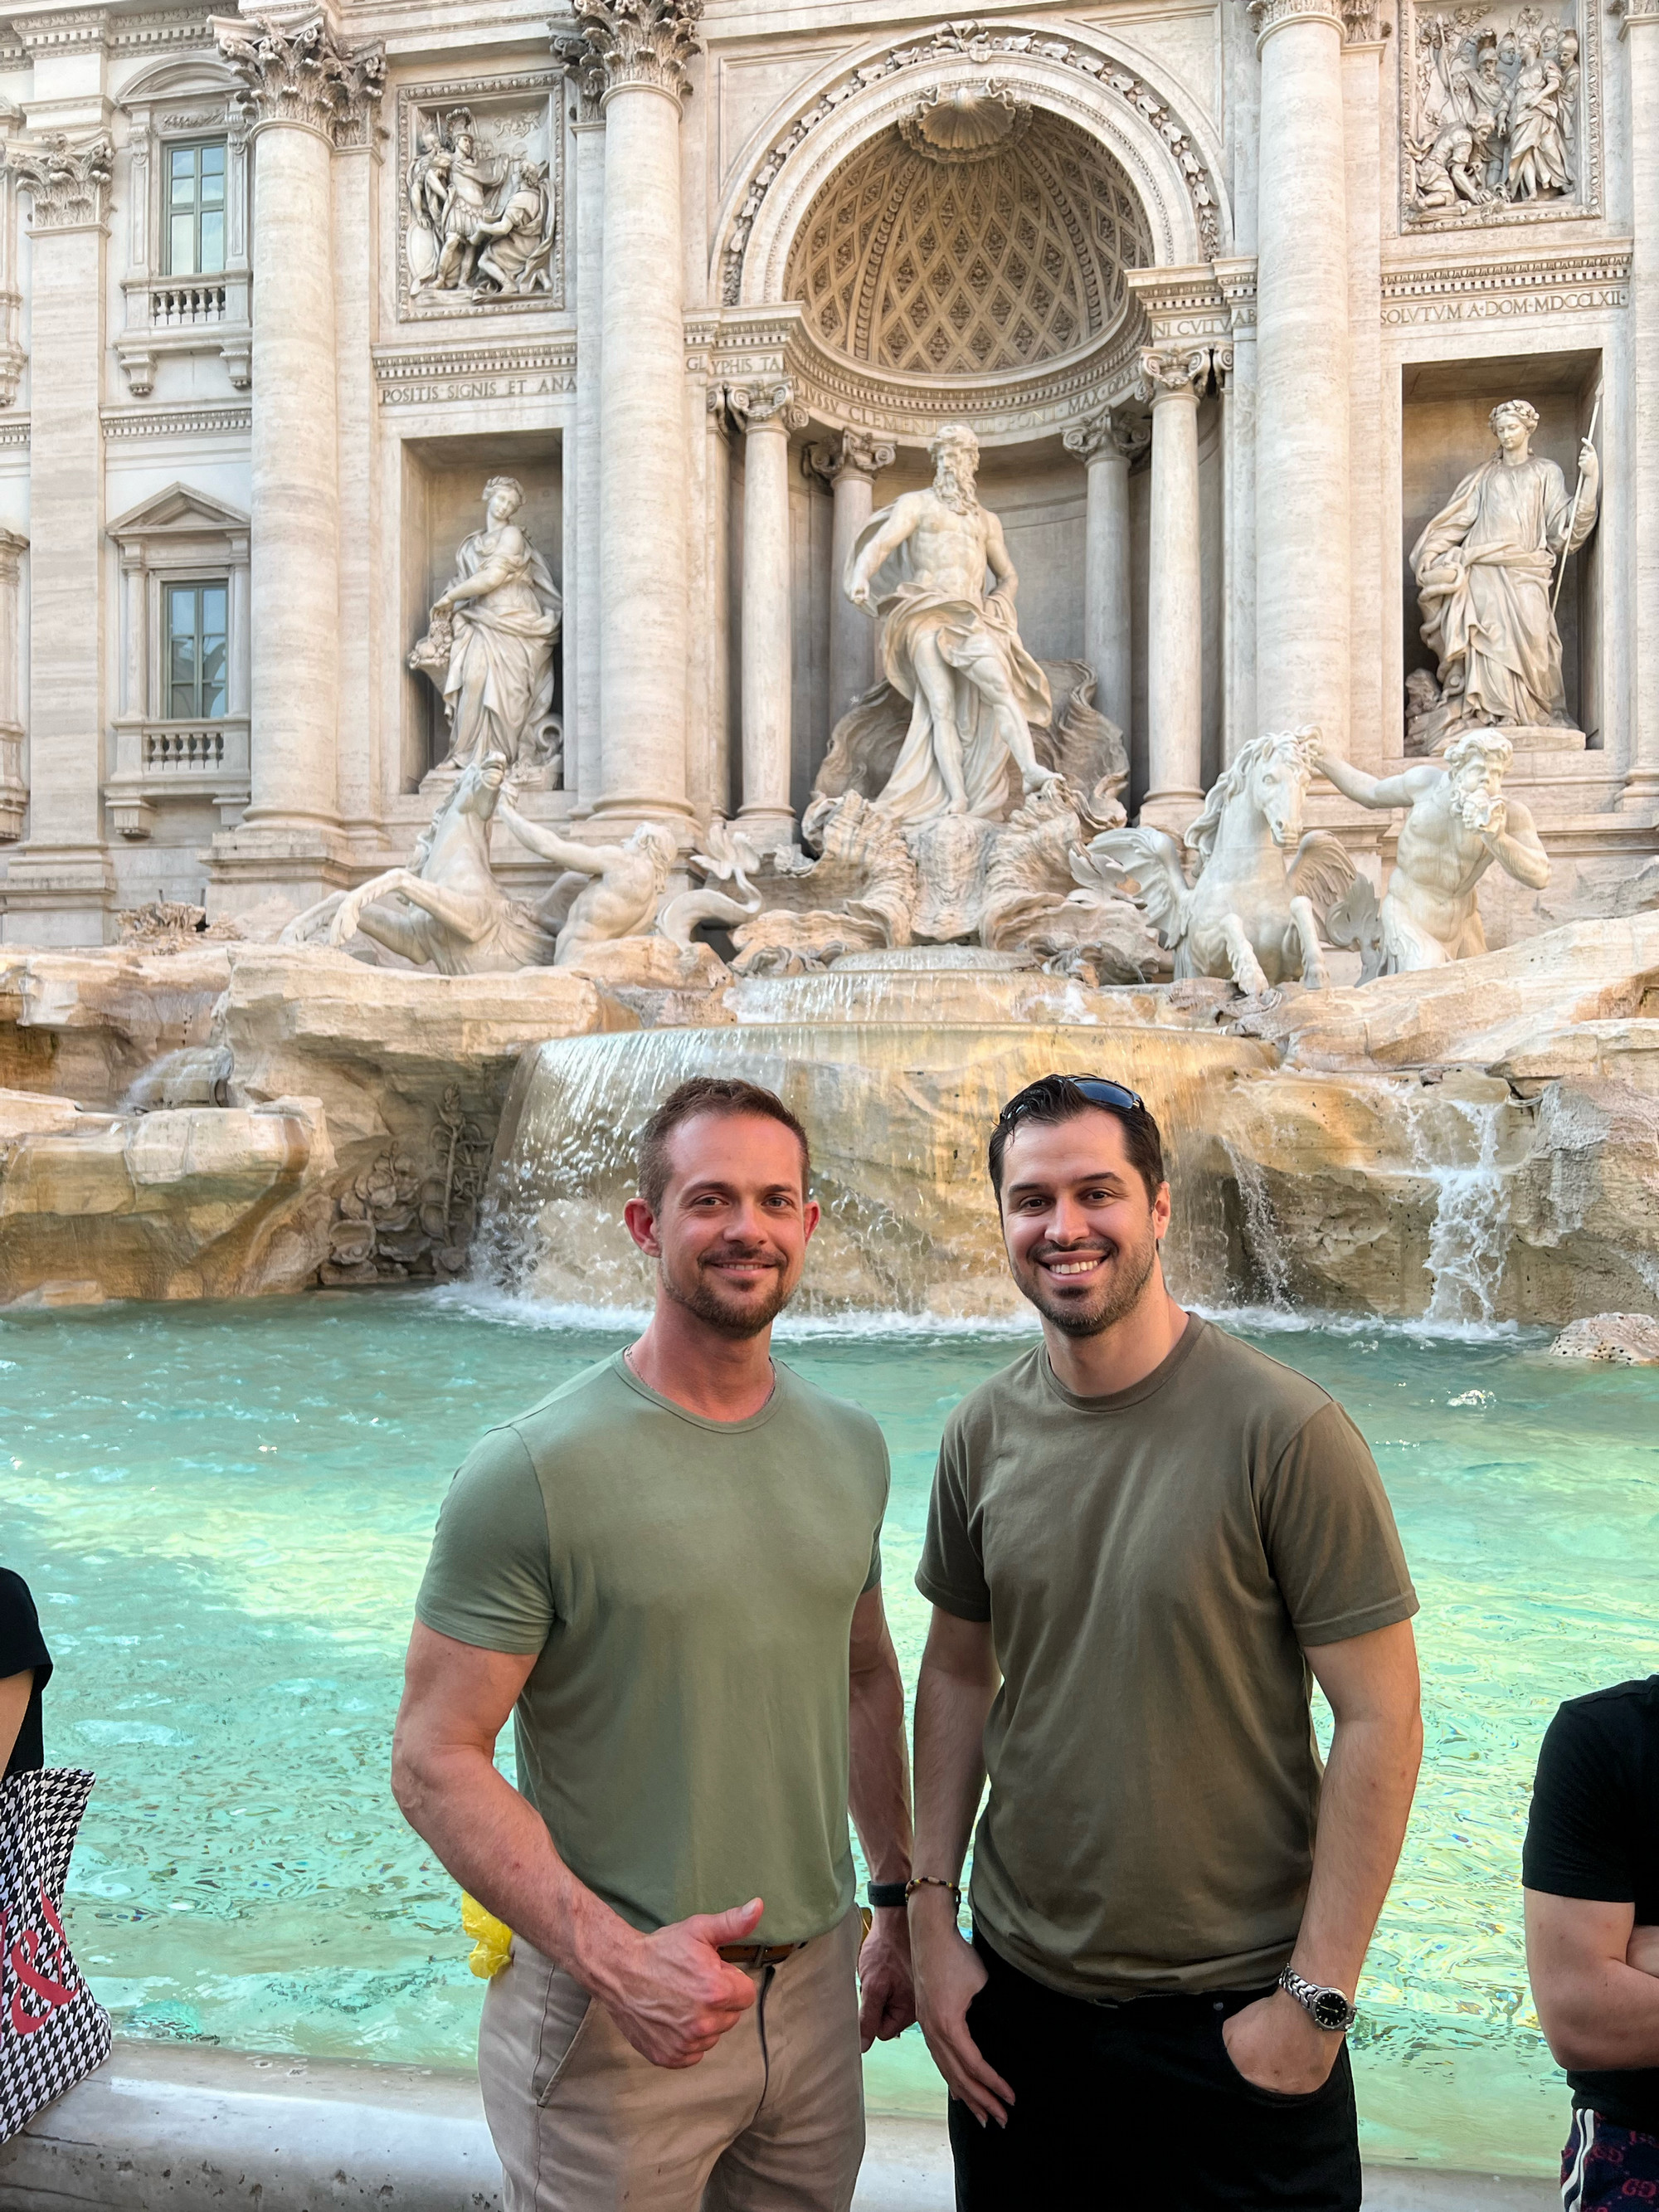 Wigginton and Oliveira in front of Trevi Fountain